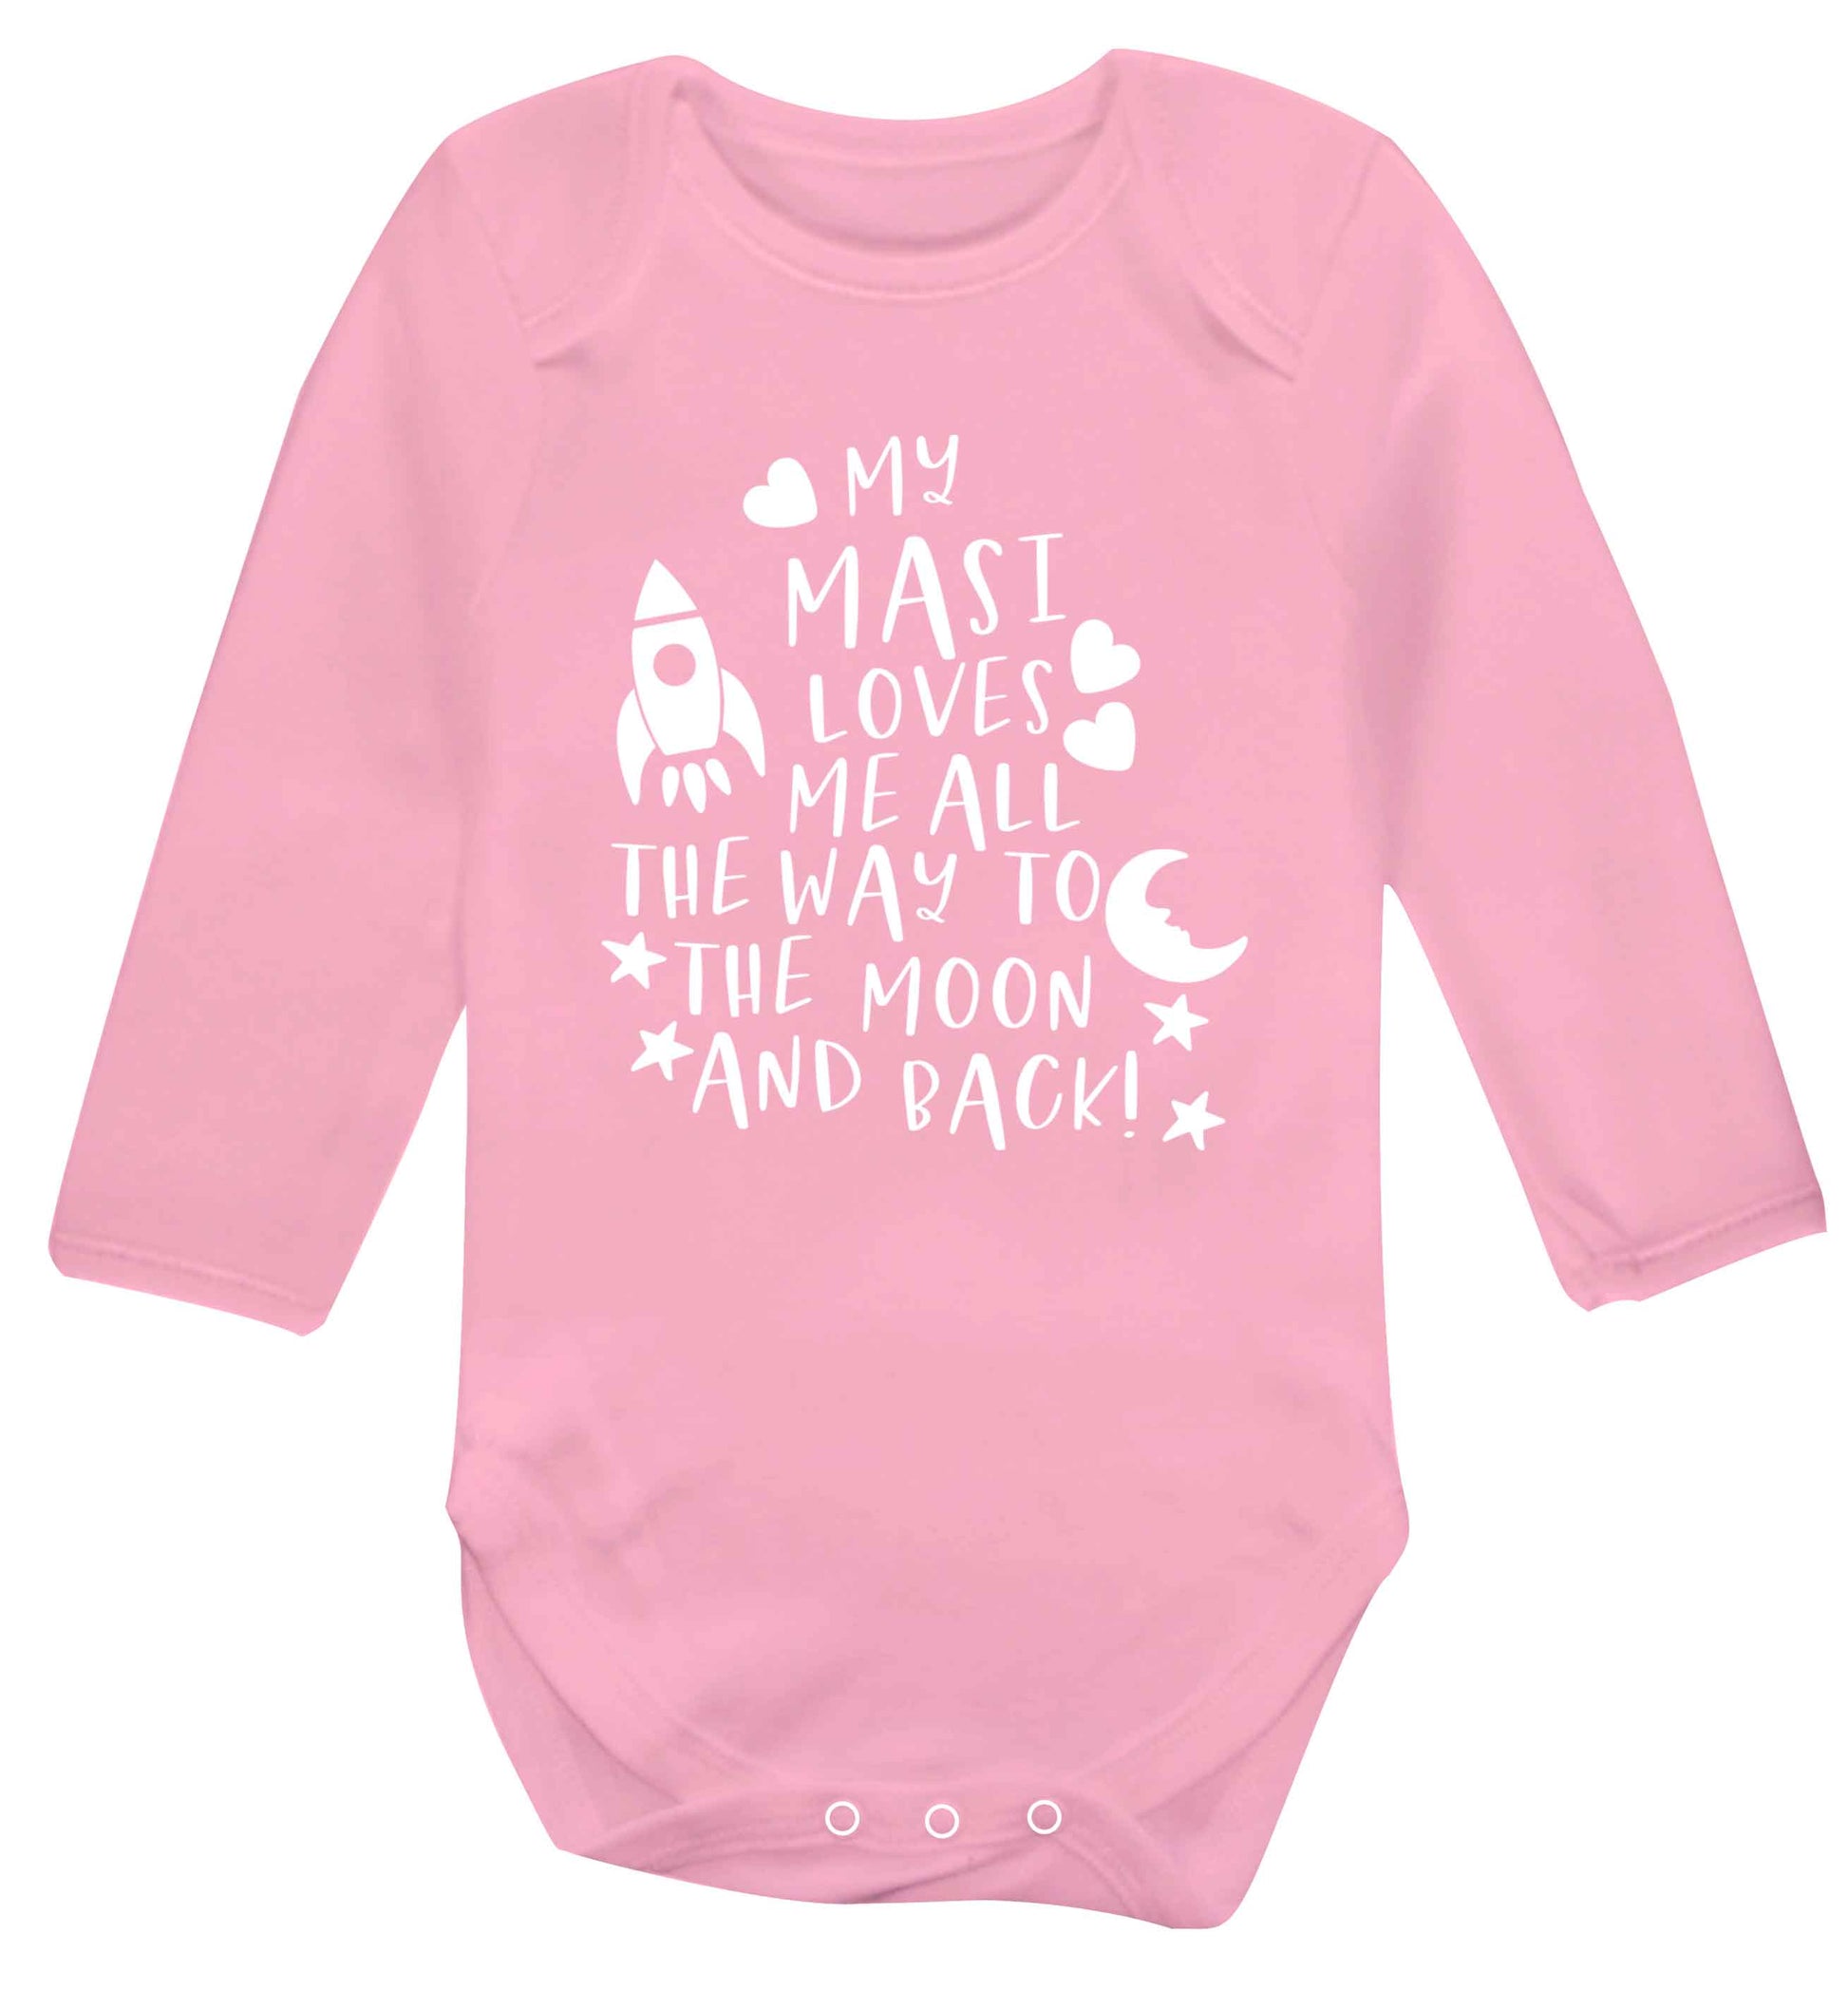 My masi loves me all the way to the moon and back Baby Vest long sleeved pale pink 6-12 months